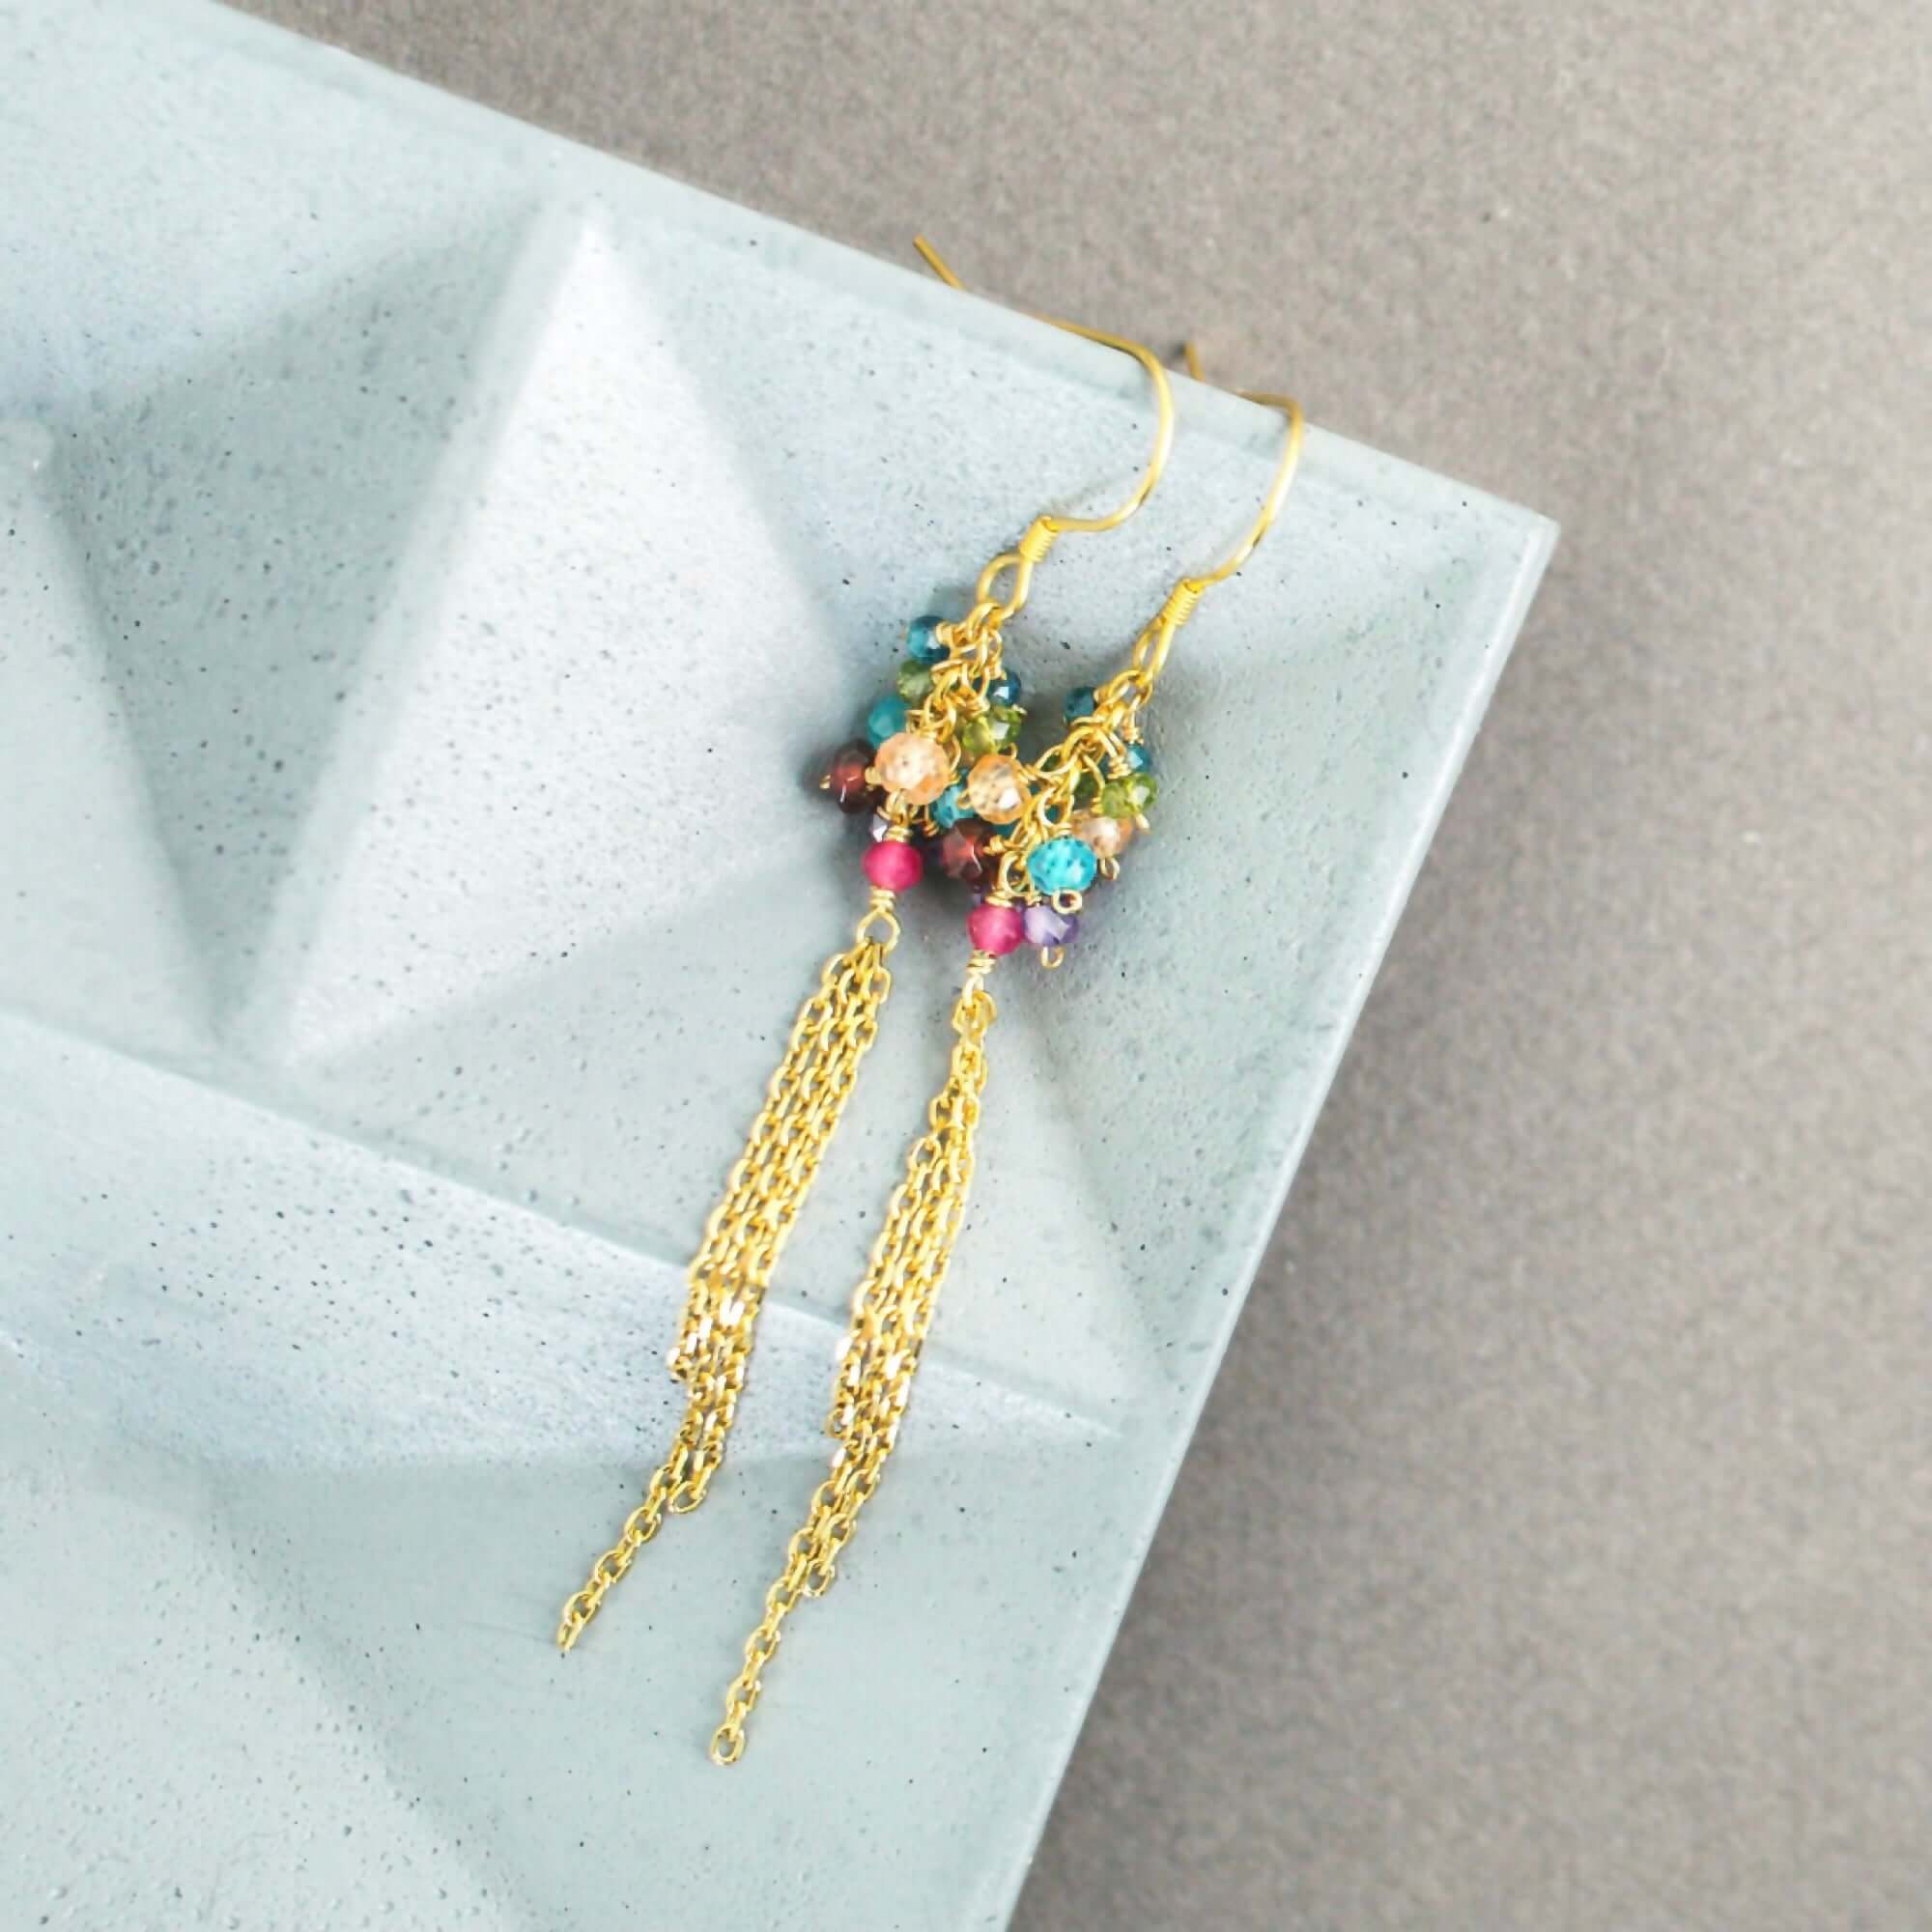 Long Earrings featuring Rainbow gemstones and French hooks for a touch of effortless elegance